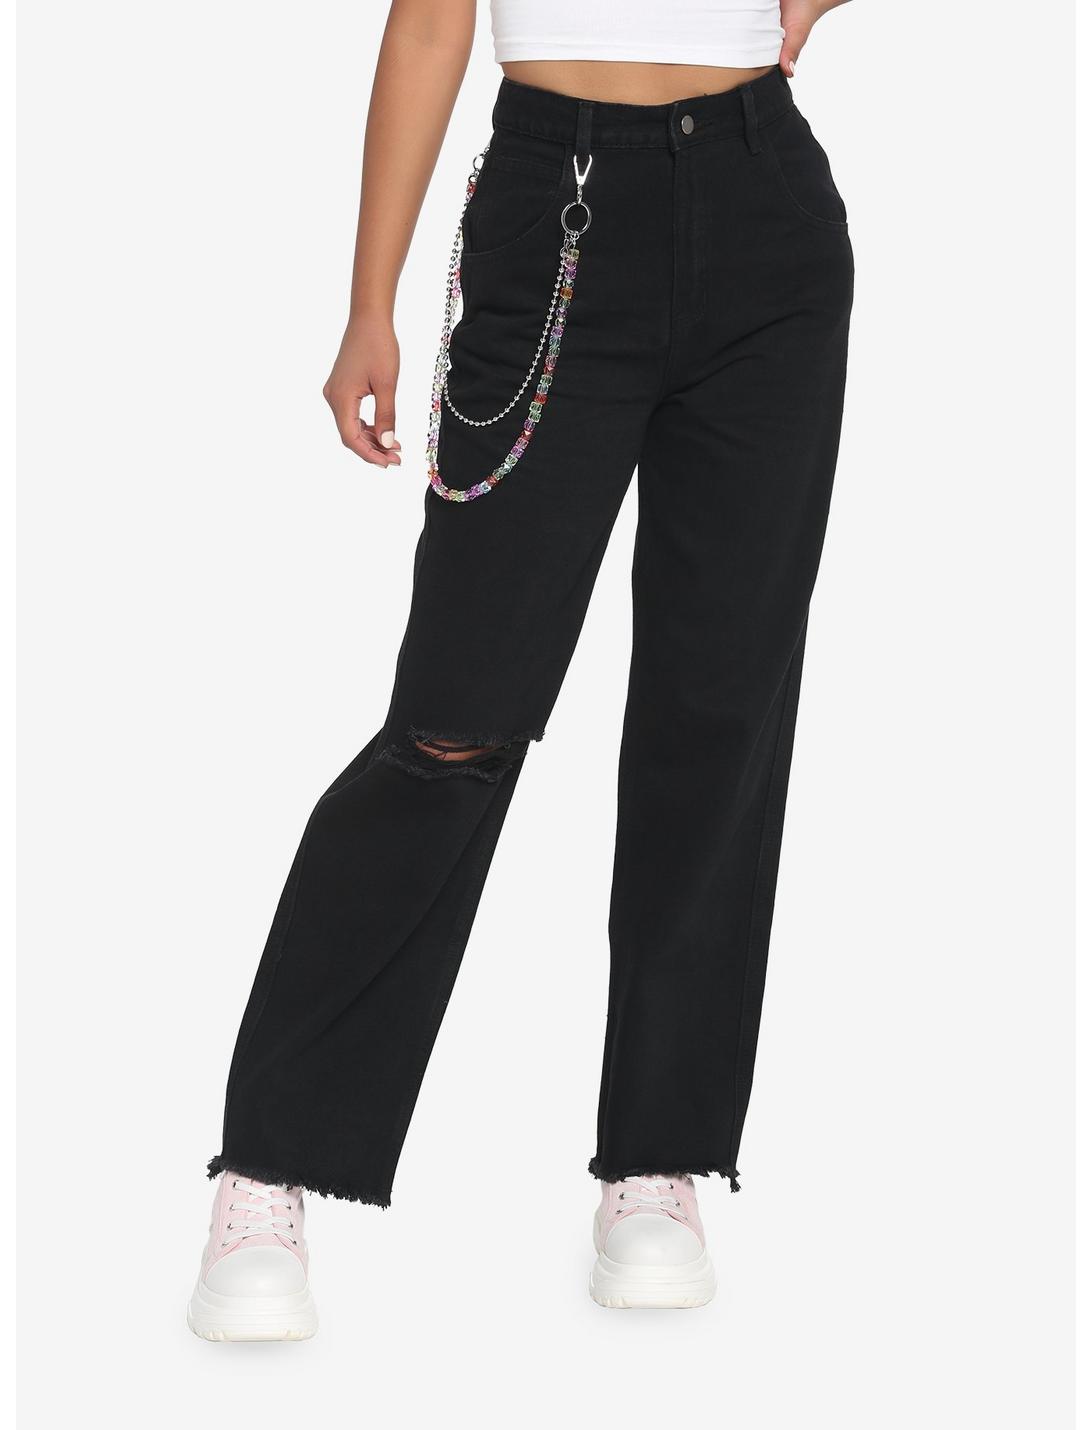 Black Straight Leg Jeans With Multicolor Beaded Chain, BLACK, hi-res